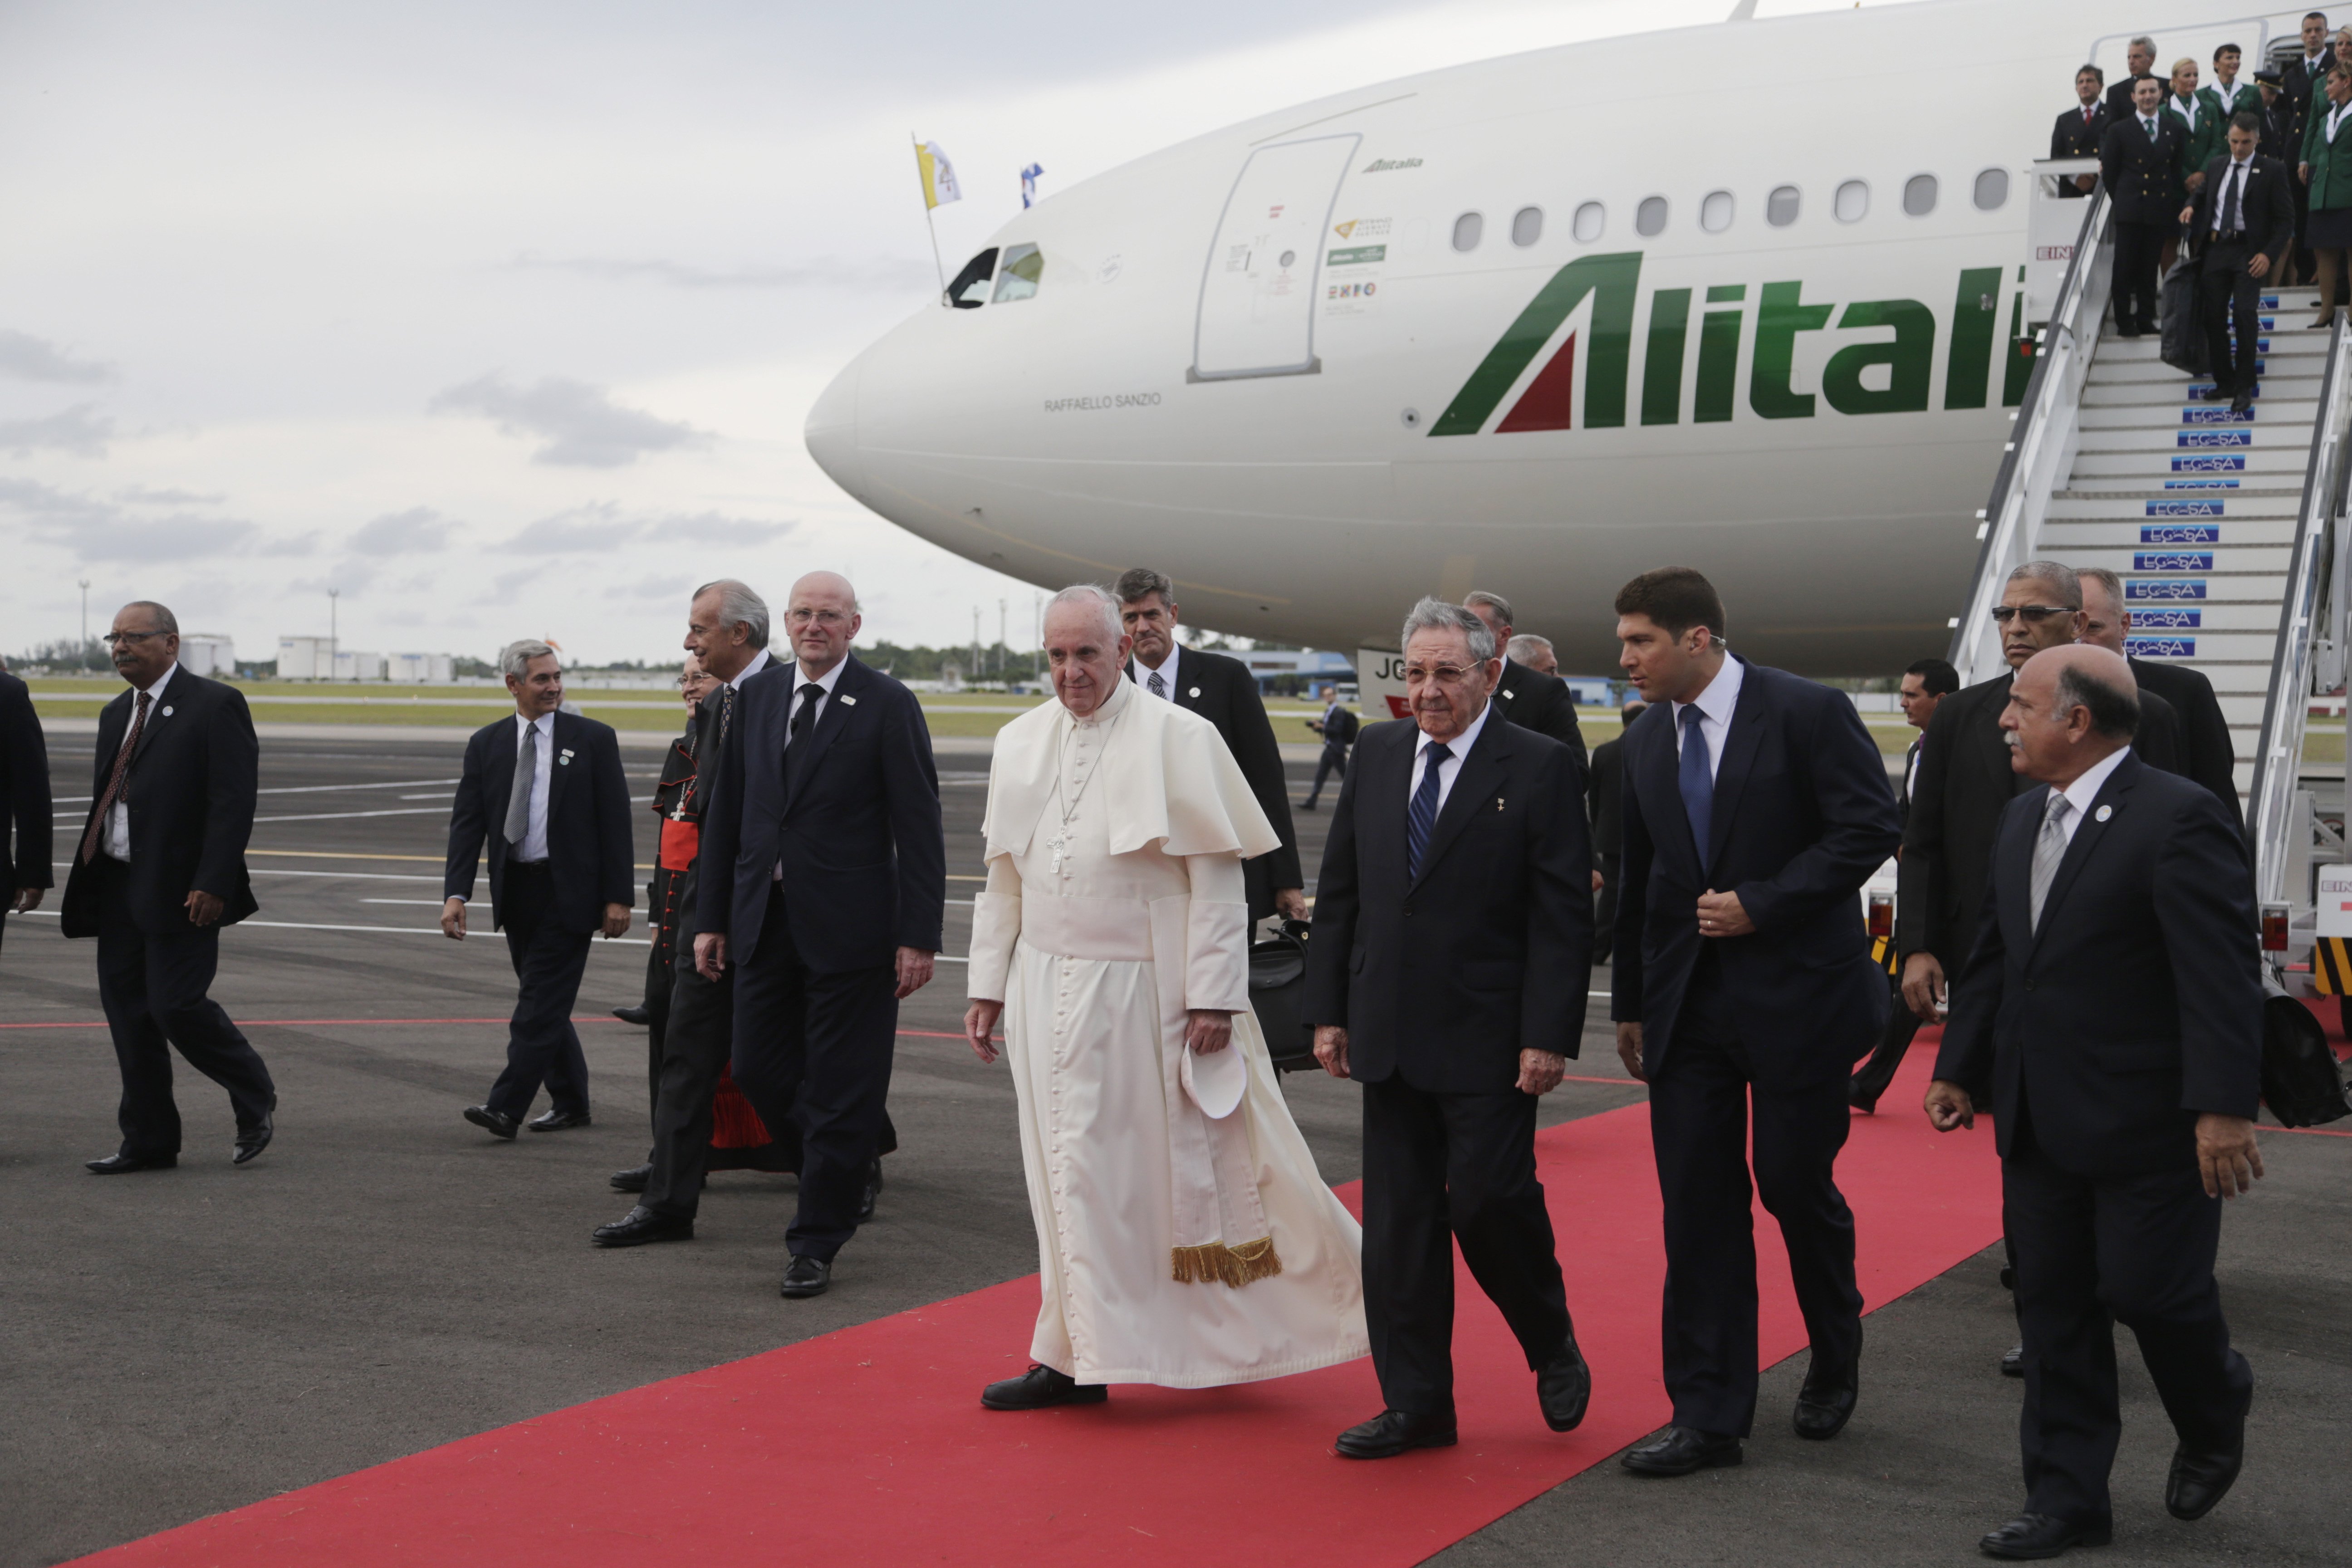 Cuba's President Raul Castro escorts Pope Francis during the pope's arrival ceremony at the airport in Havana, Cuba, on Sept. 19, 2015.